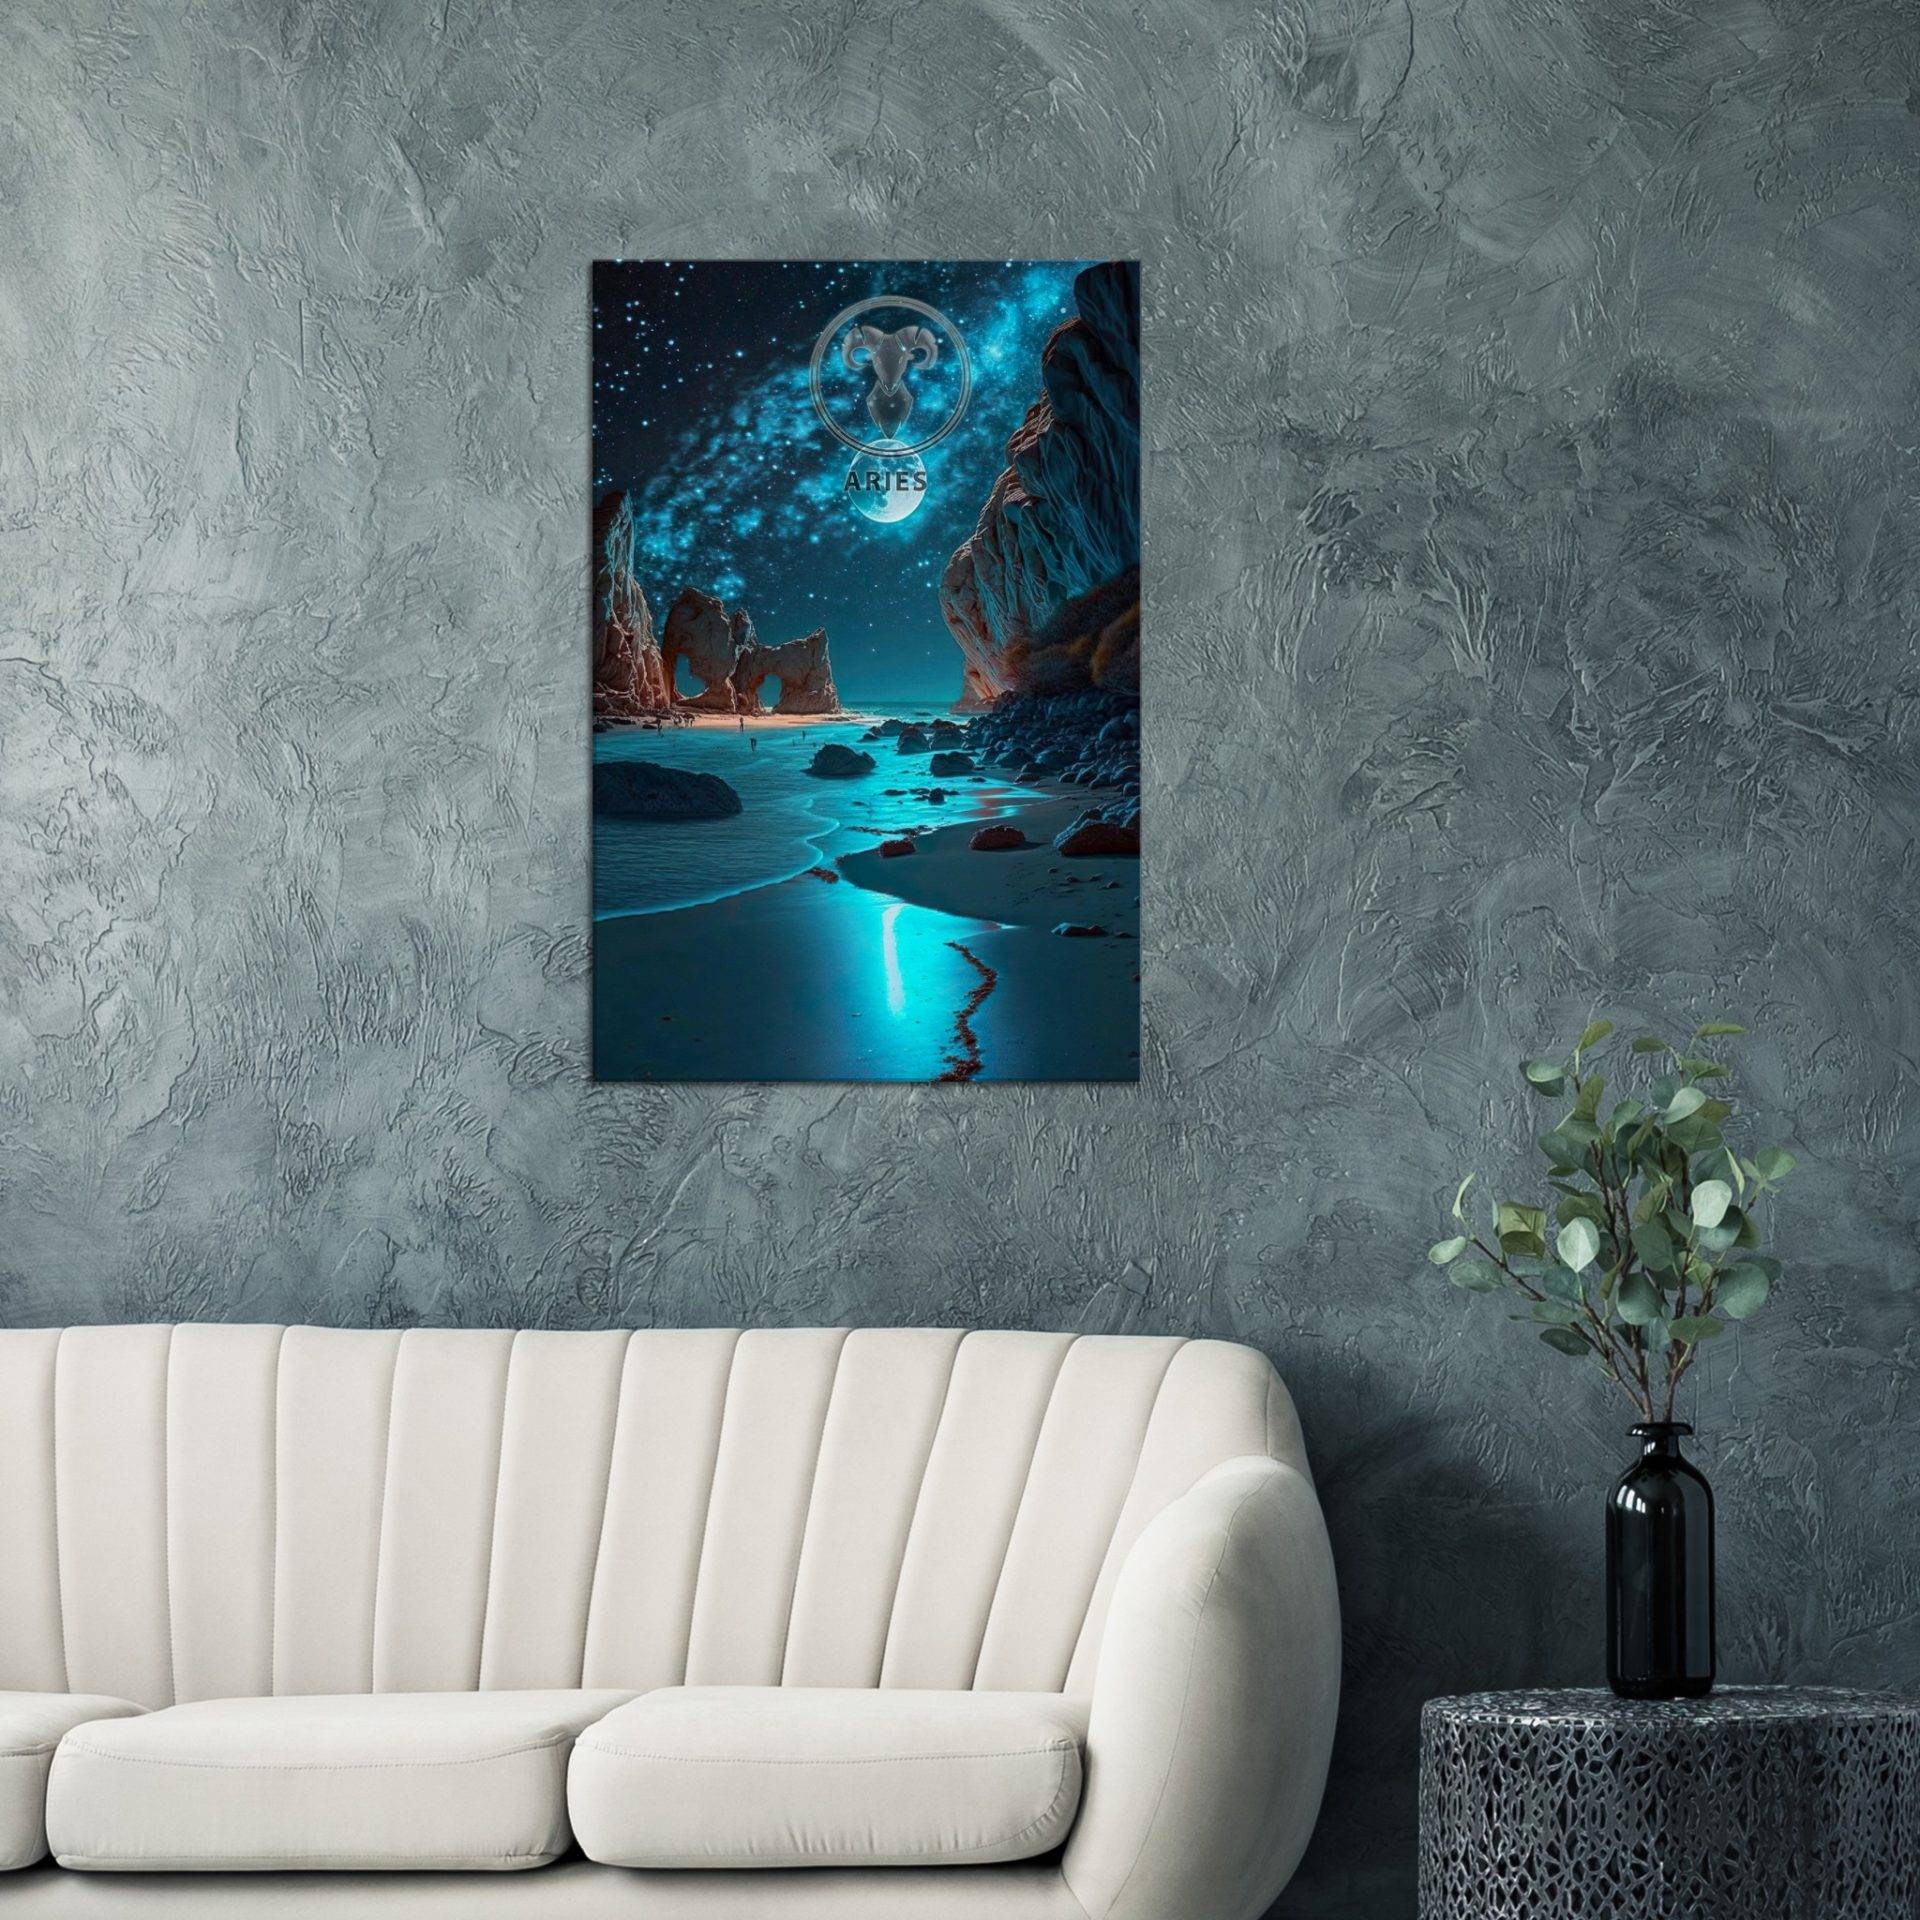 Moon with Aries (Canvas Print) Fabled Gallery https://fabledgallery.art/?post_type=product&p=36998